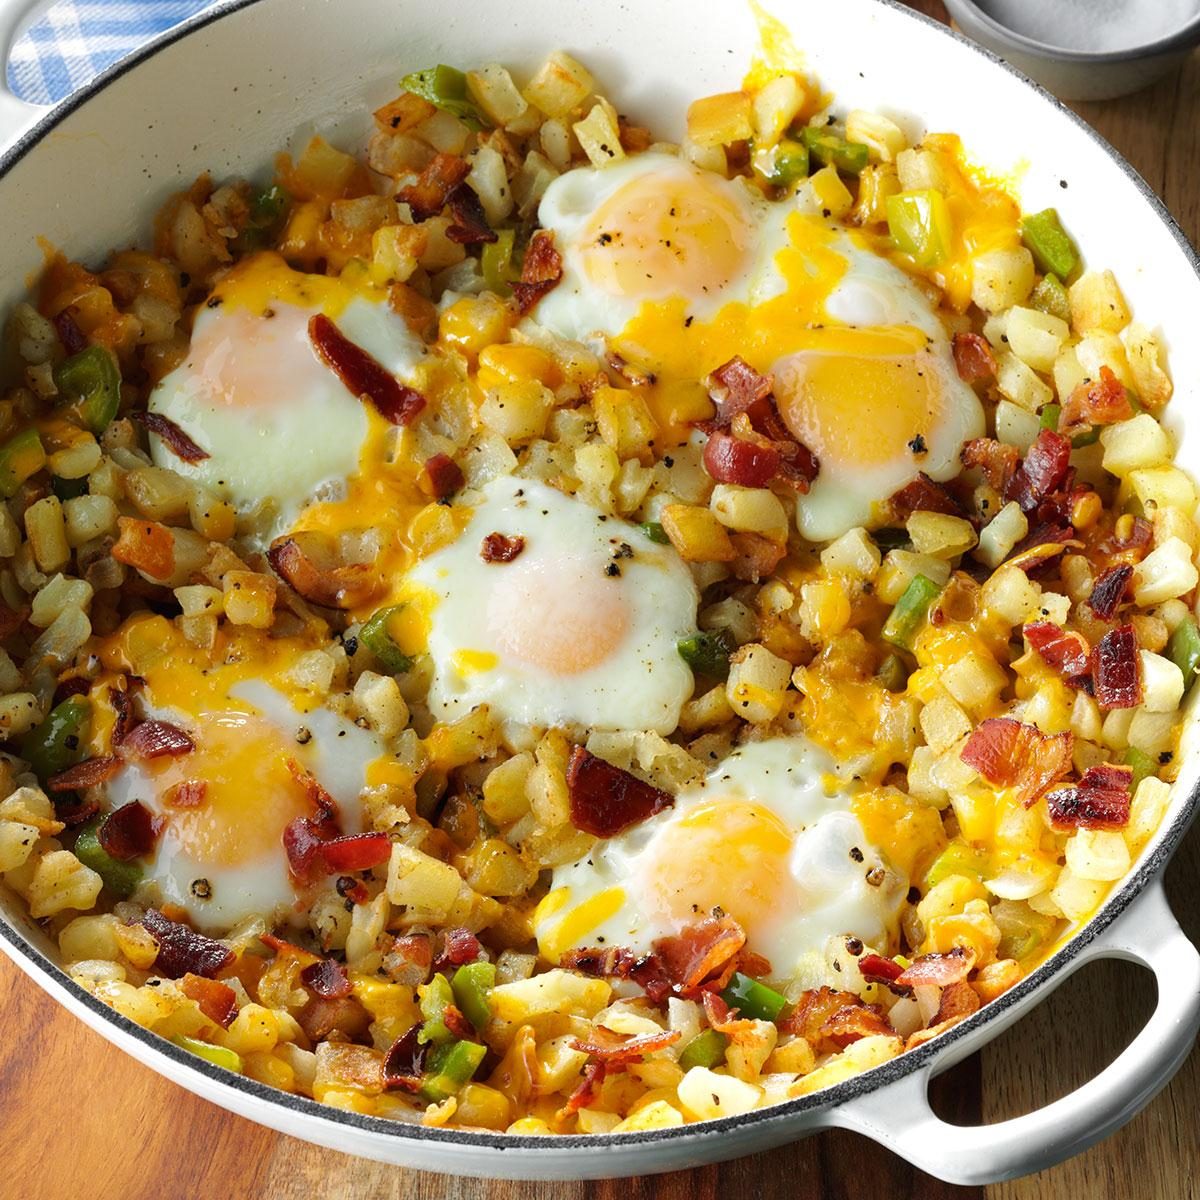 Country Brunch Skillet Recipe: How to Make It